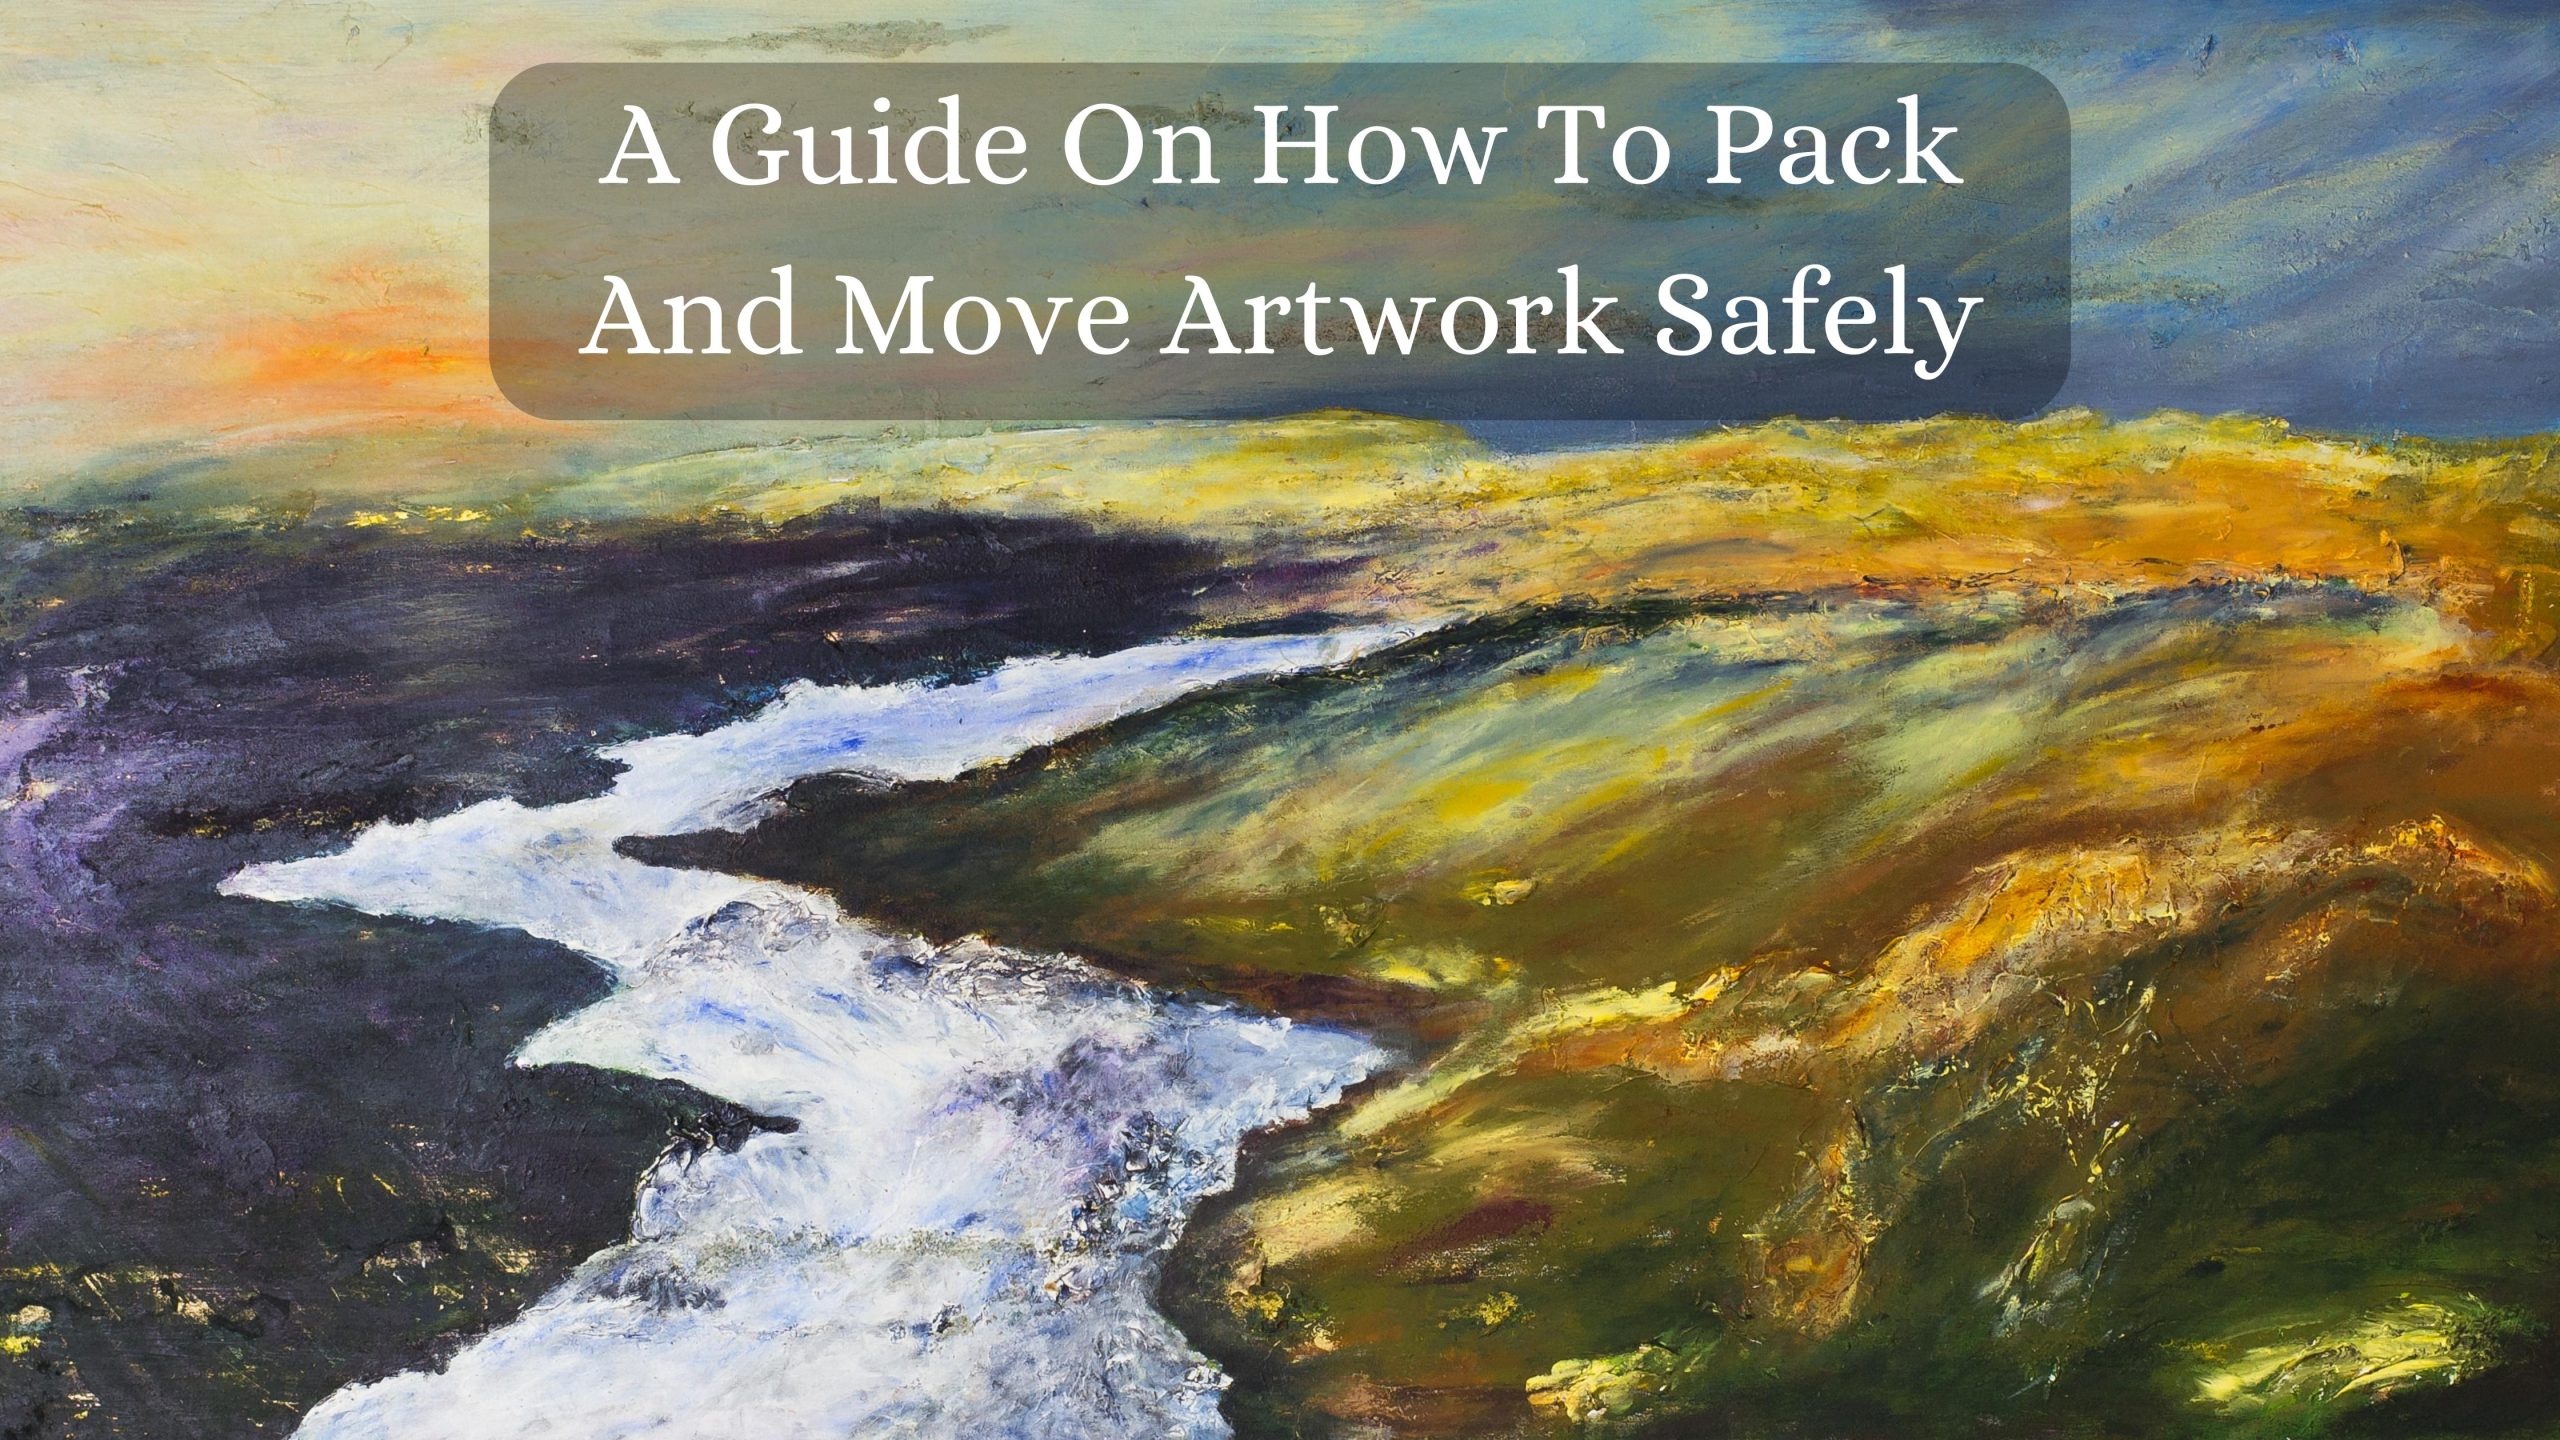 A guide on how to pack and move artwork safely